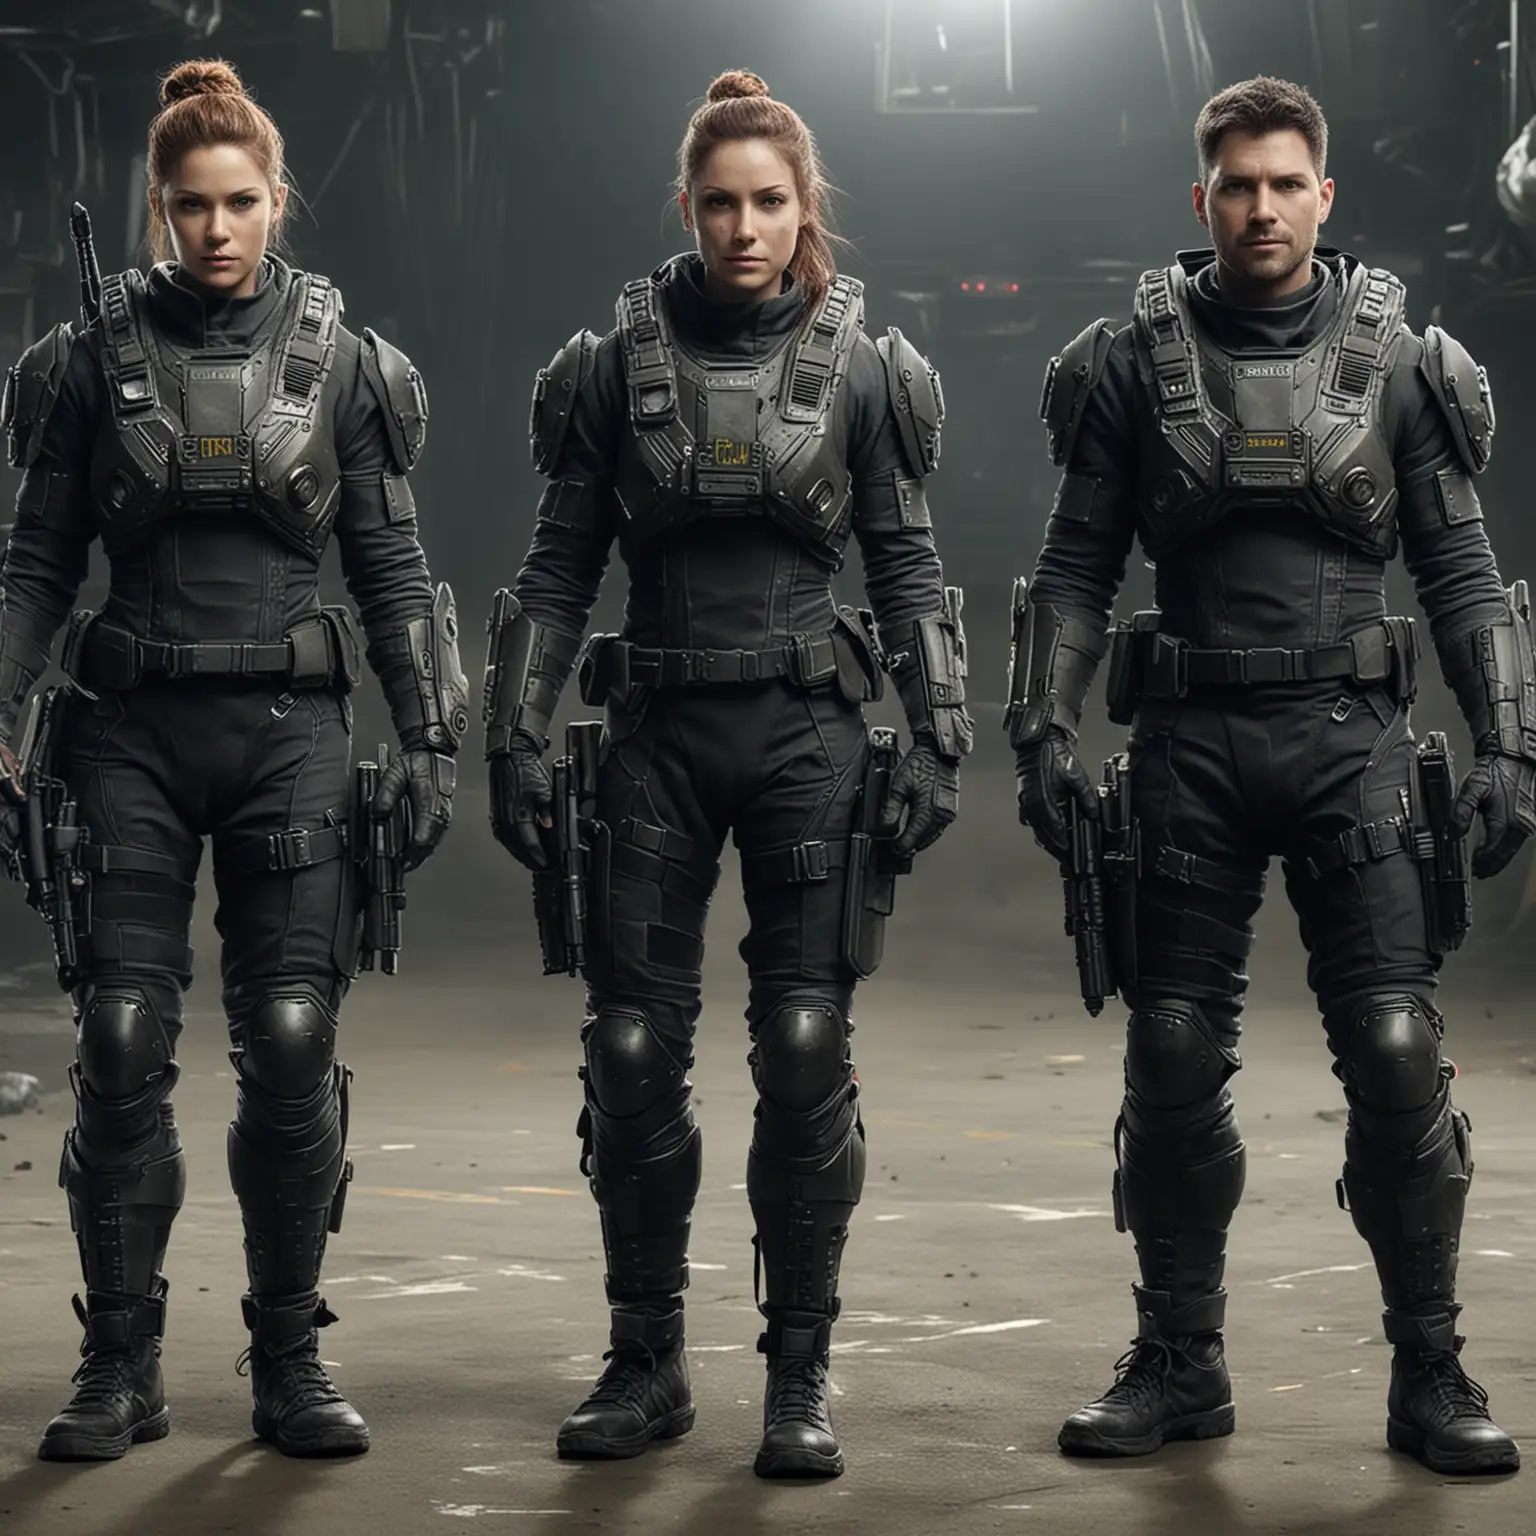 generate an image of a syfy tactical future team